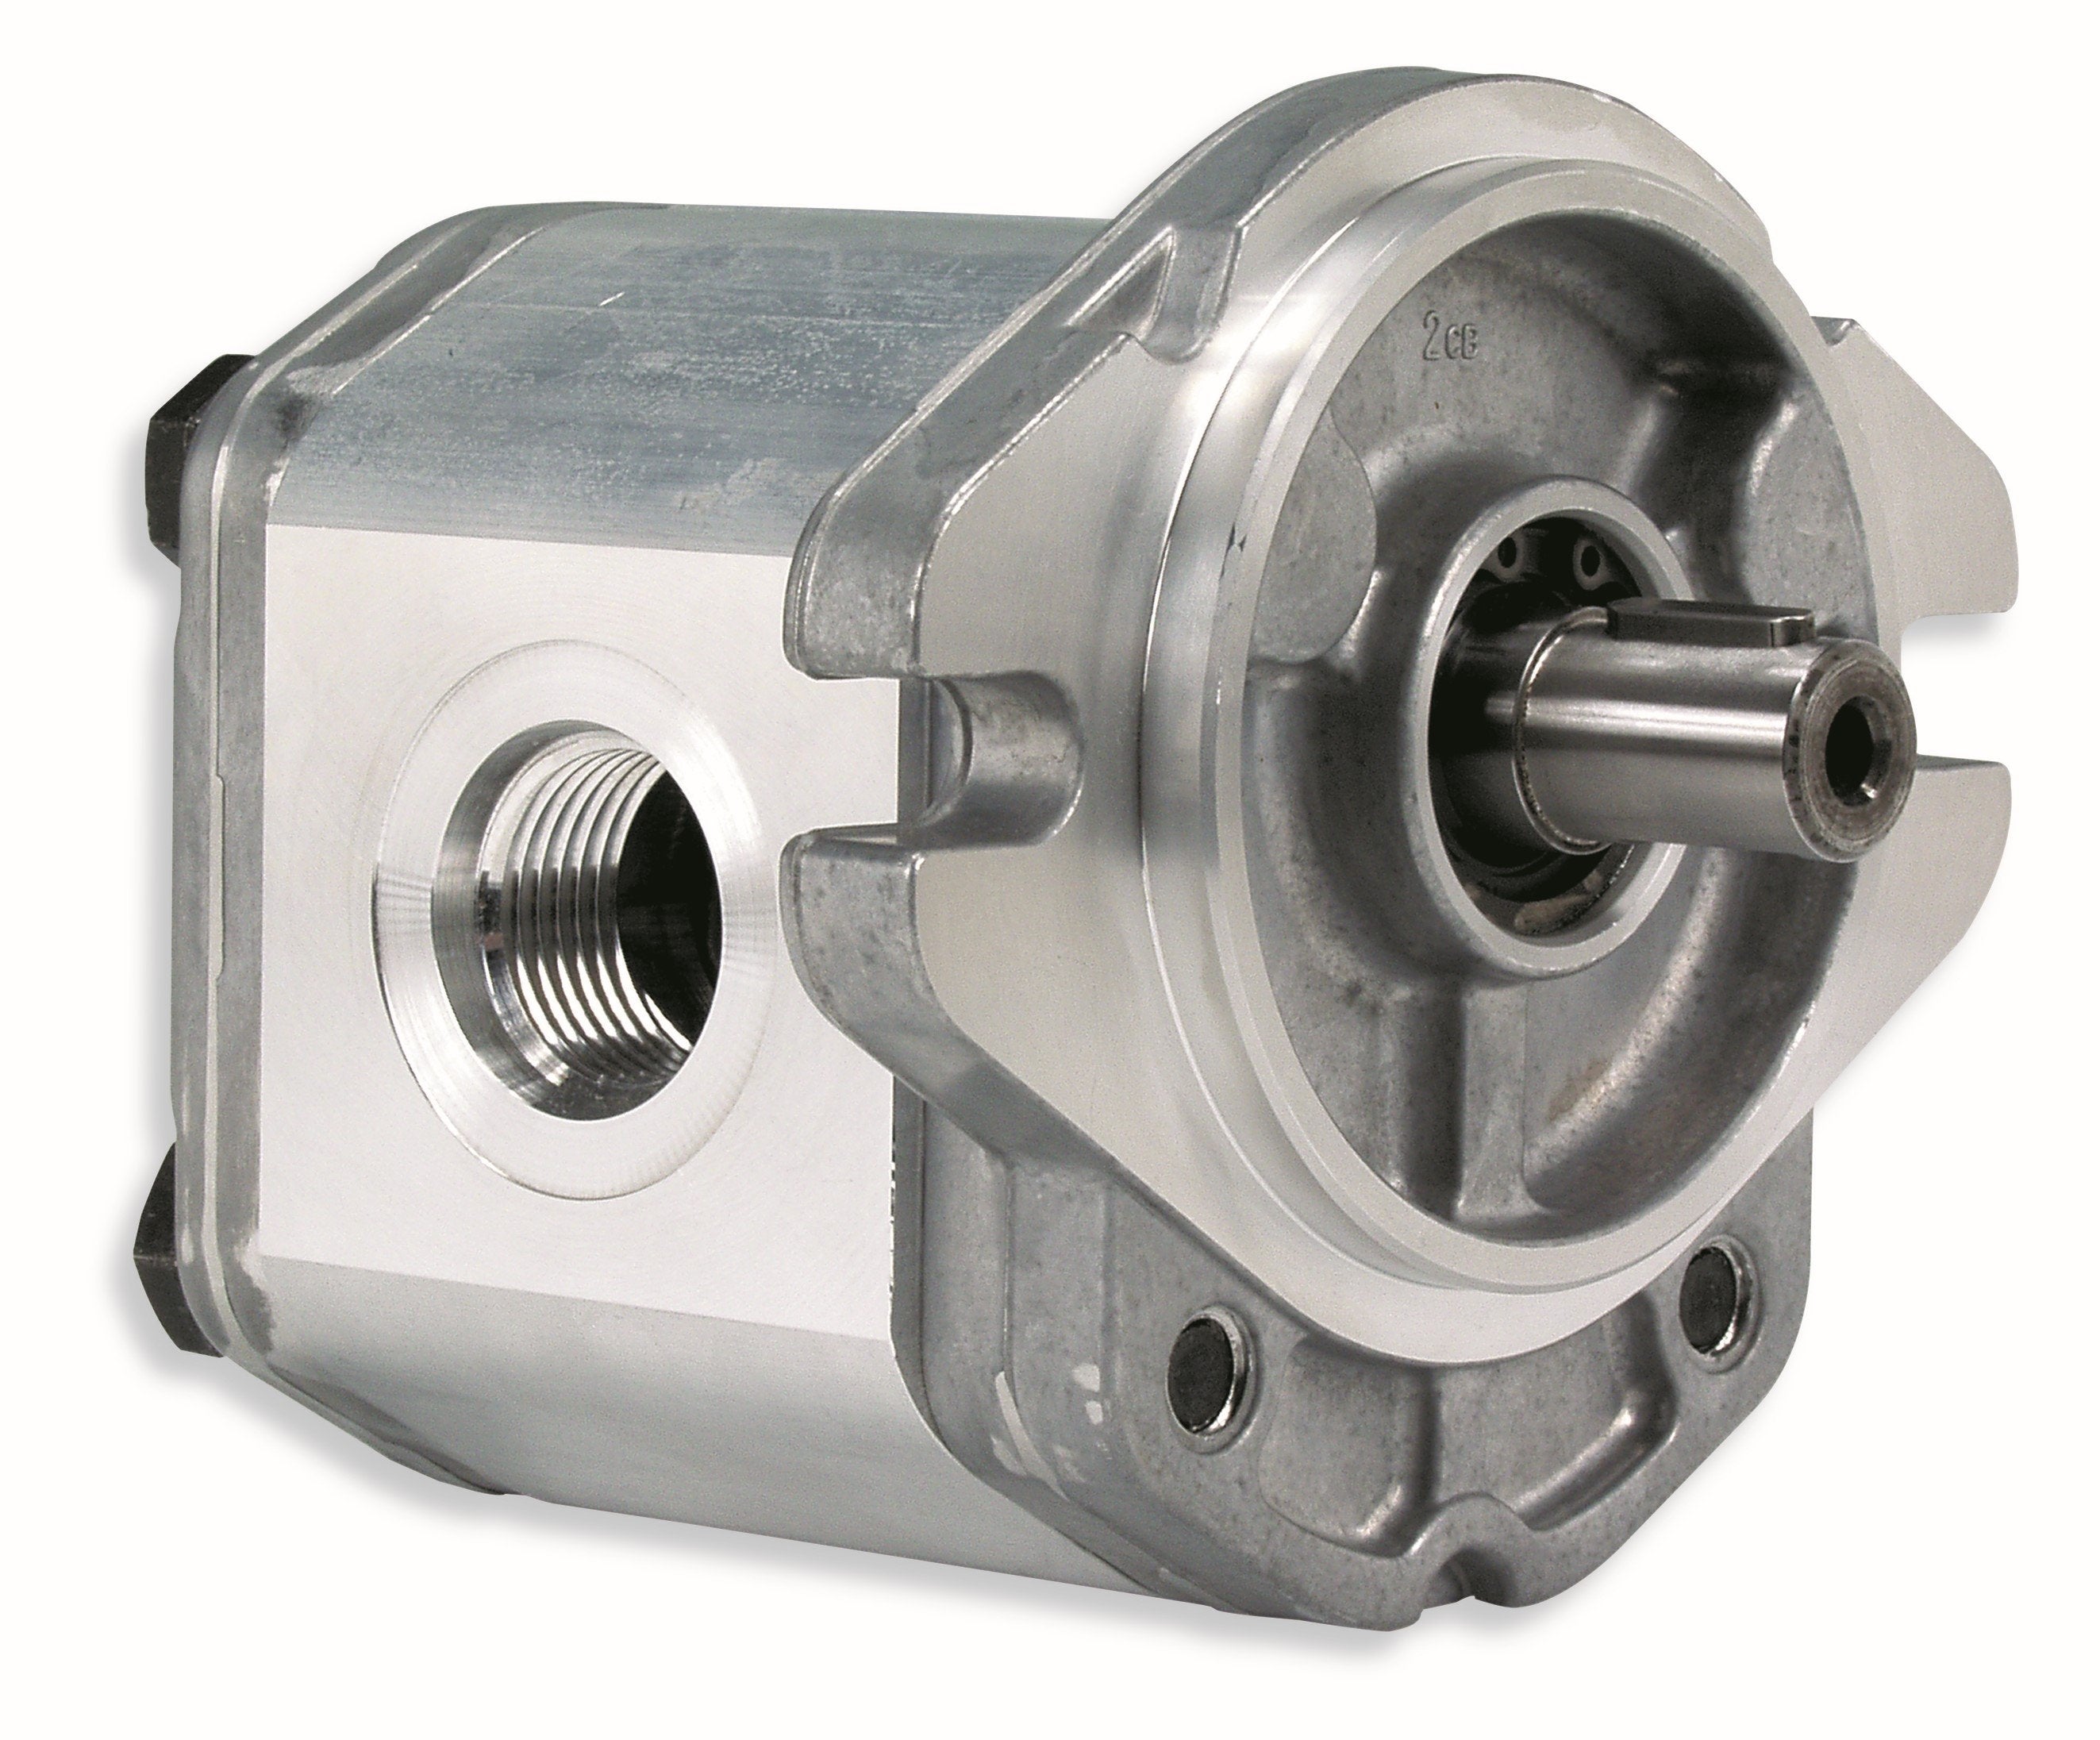 GHM2A-R-10-E2 : Marzocchi Gear Motor, Bidirectional, 7cc, 4060psi rated, 4000RPM, 0.75 (3/4") #12 SAE ports, 5/8" Bore x 5/32" Keyed Shaft